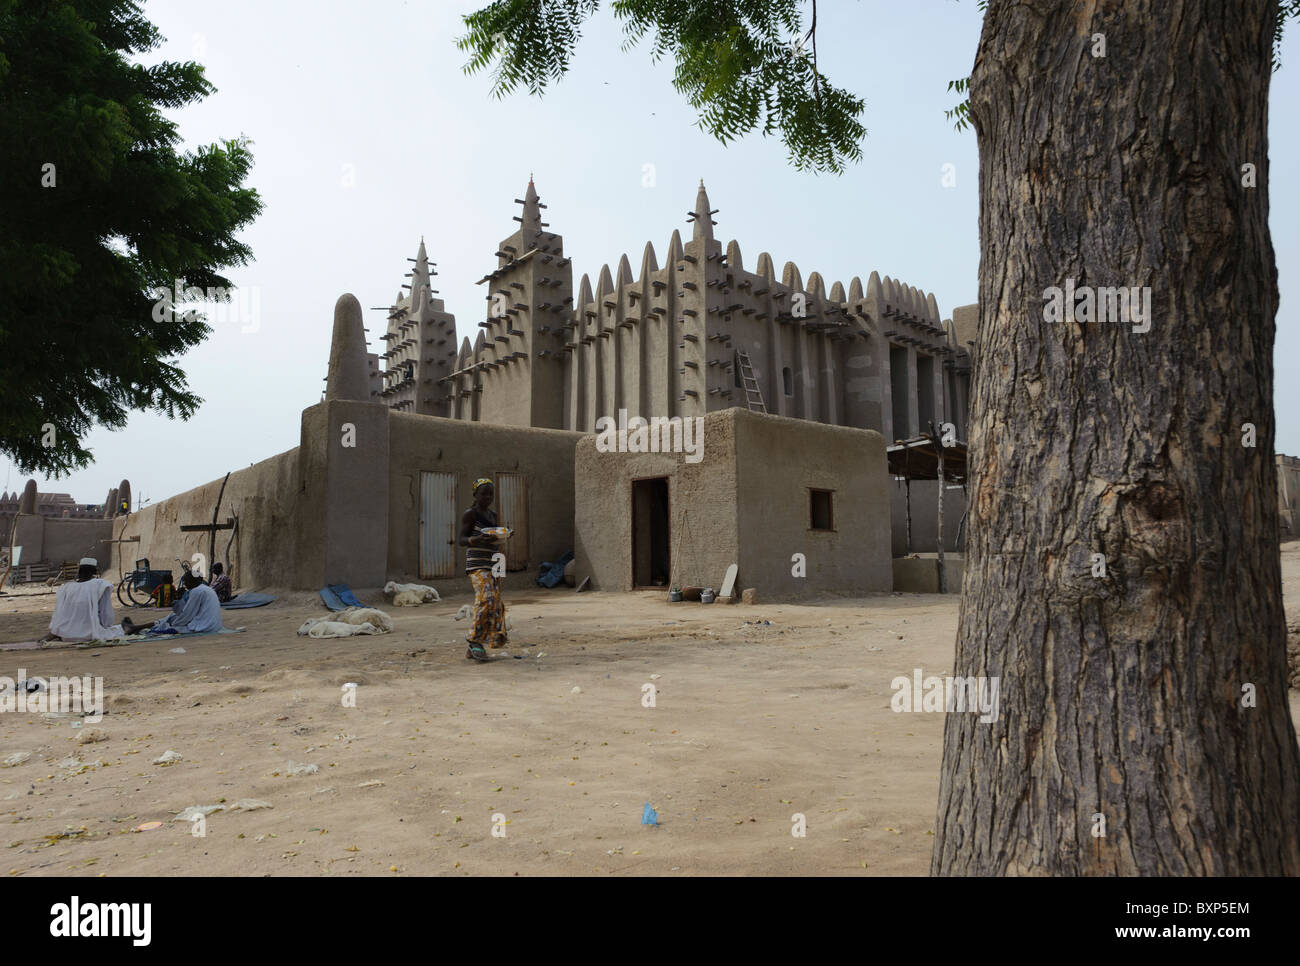 North eastern corner of the Great  Mosque of Djenné, Mali Stock Photo